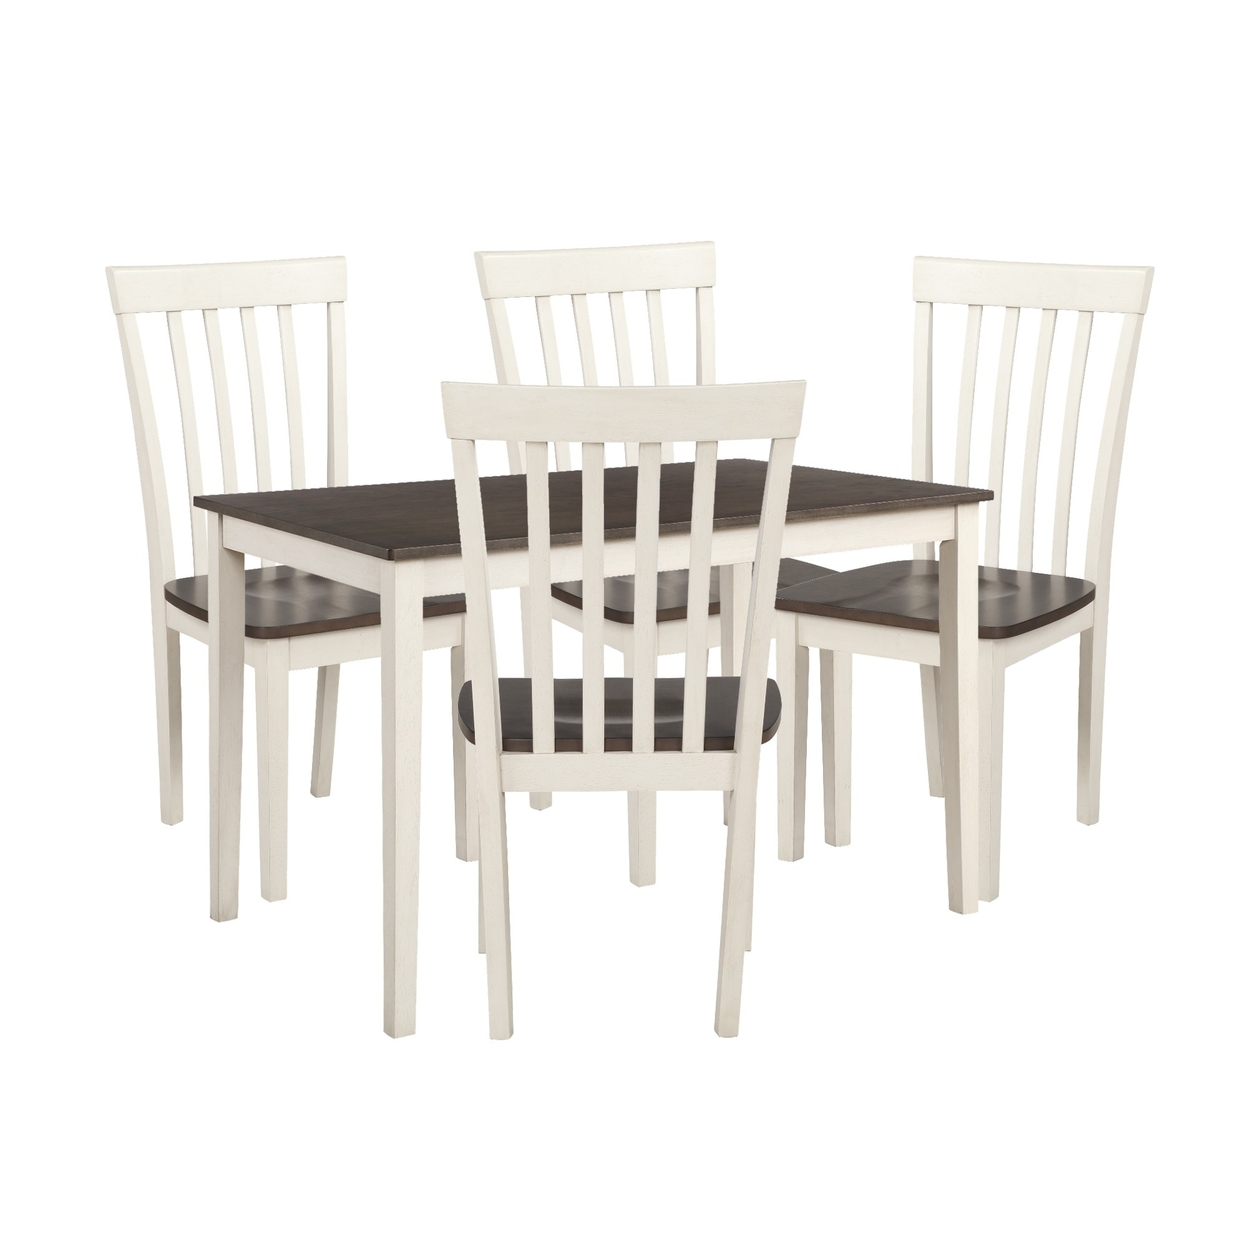 5 Piece Dining Table Set With 4 Chairs, Wood Frame, White And Grayish Brown -Saltoro Sherpi